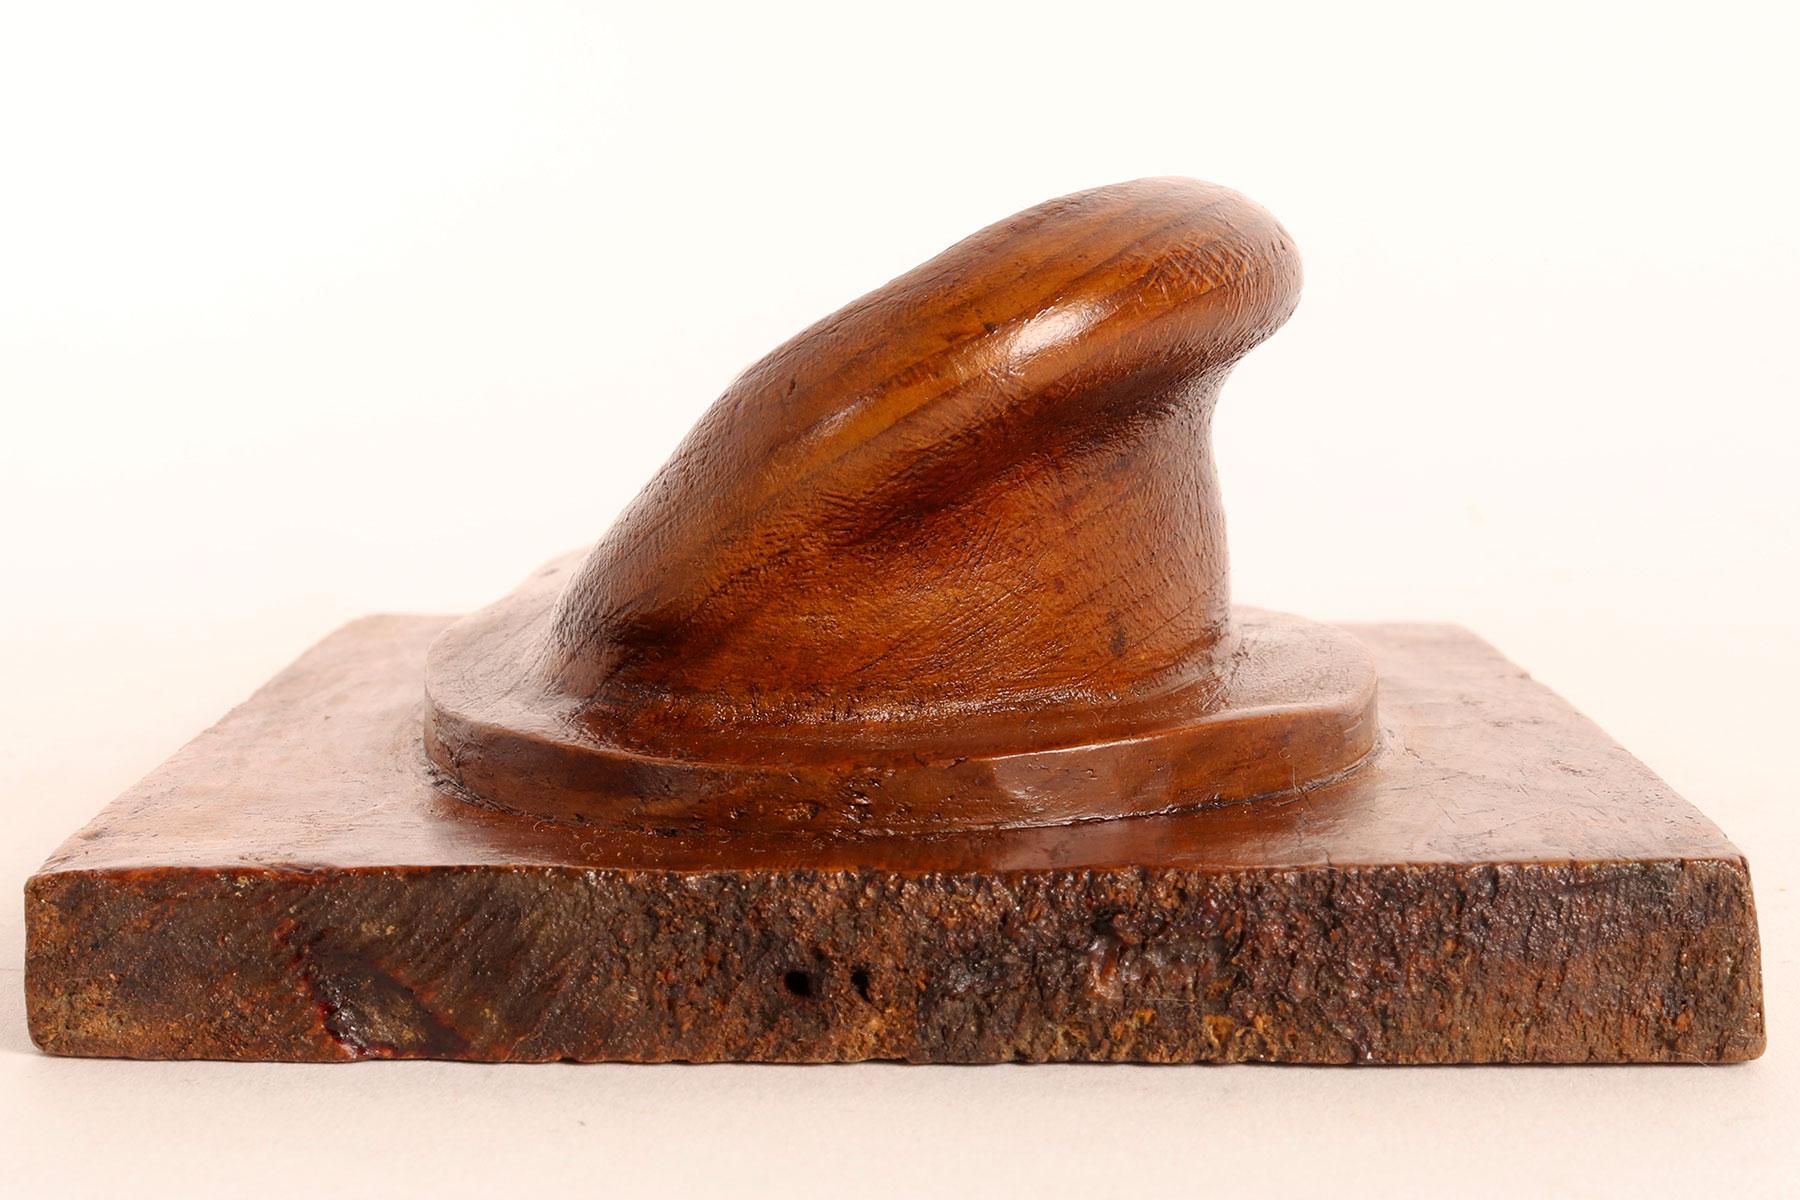 20th Century Artistic Atelier Sculpture Depicting a Ear, Germany 1902 For Sale